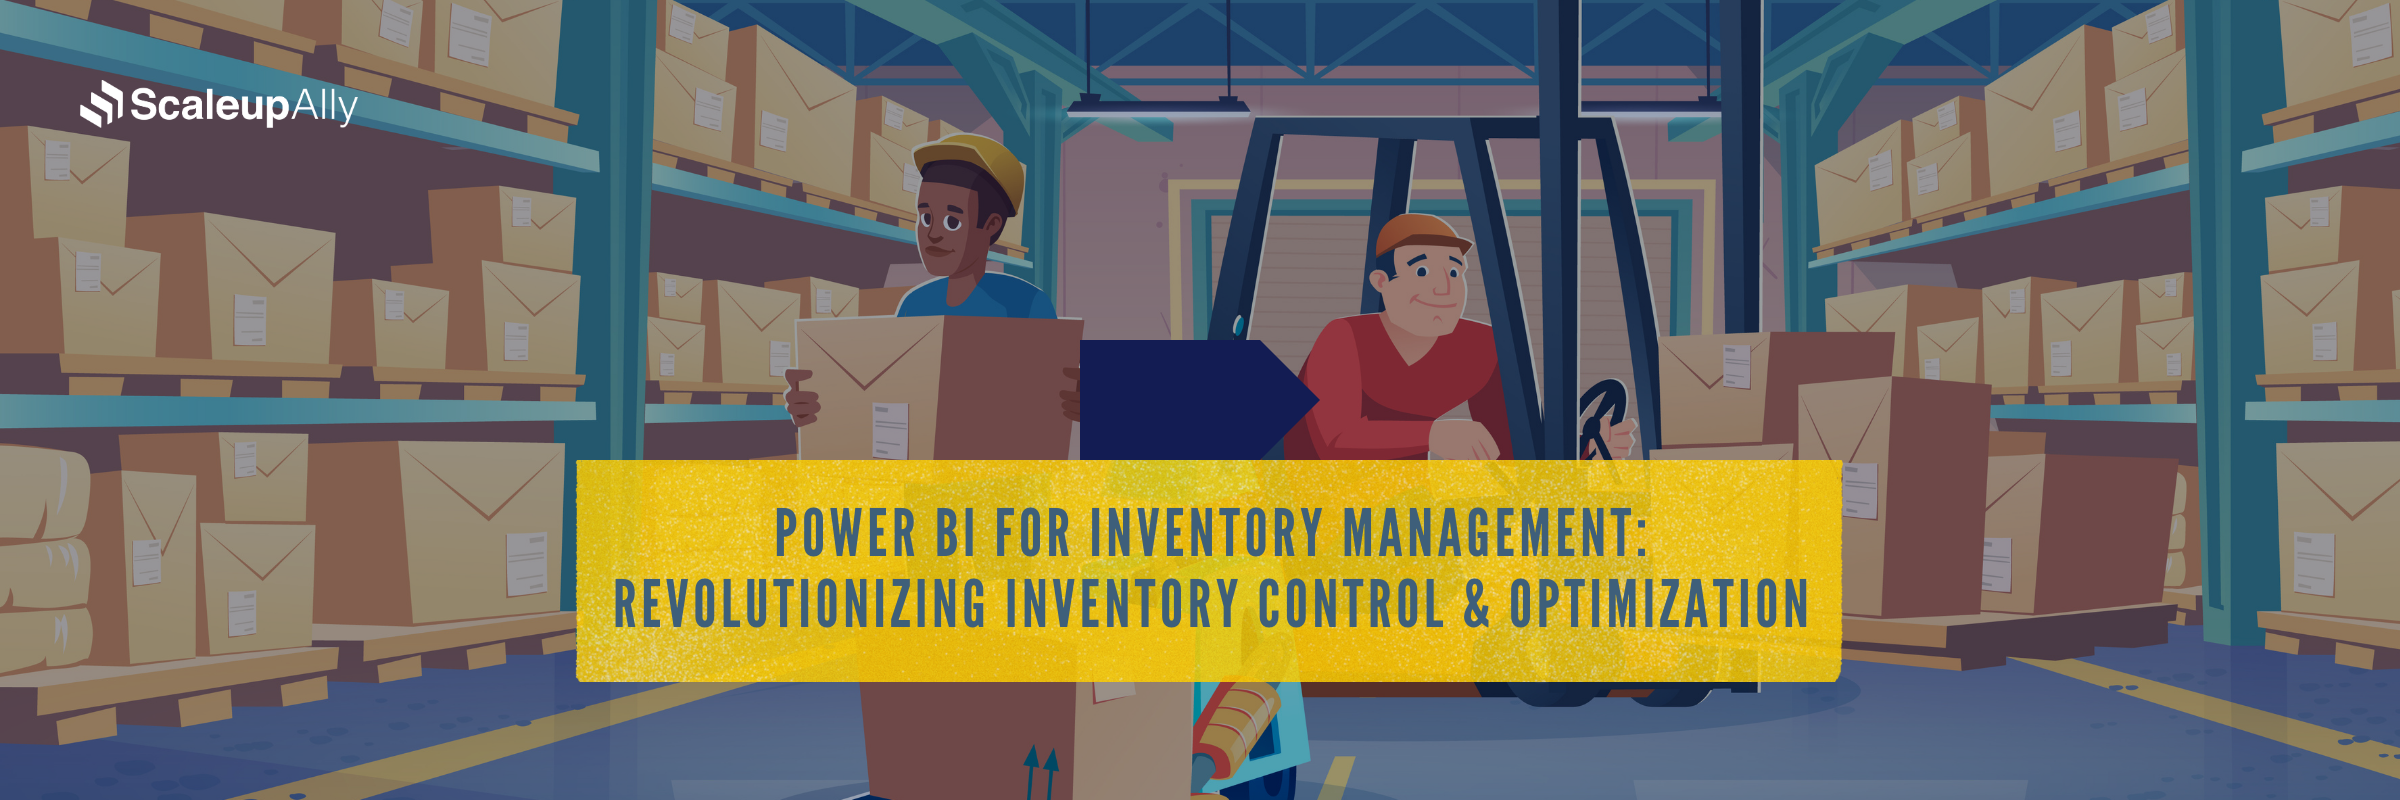 Power BI for Inventory Management: Revolutionizing Inventory Control and Optimization